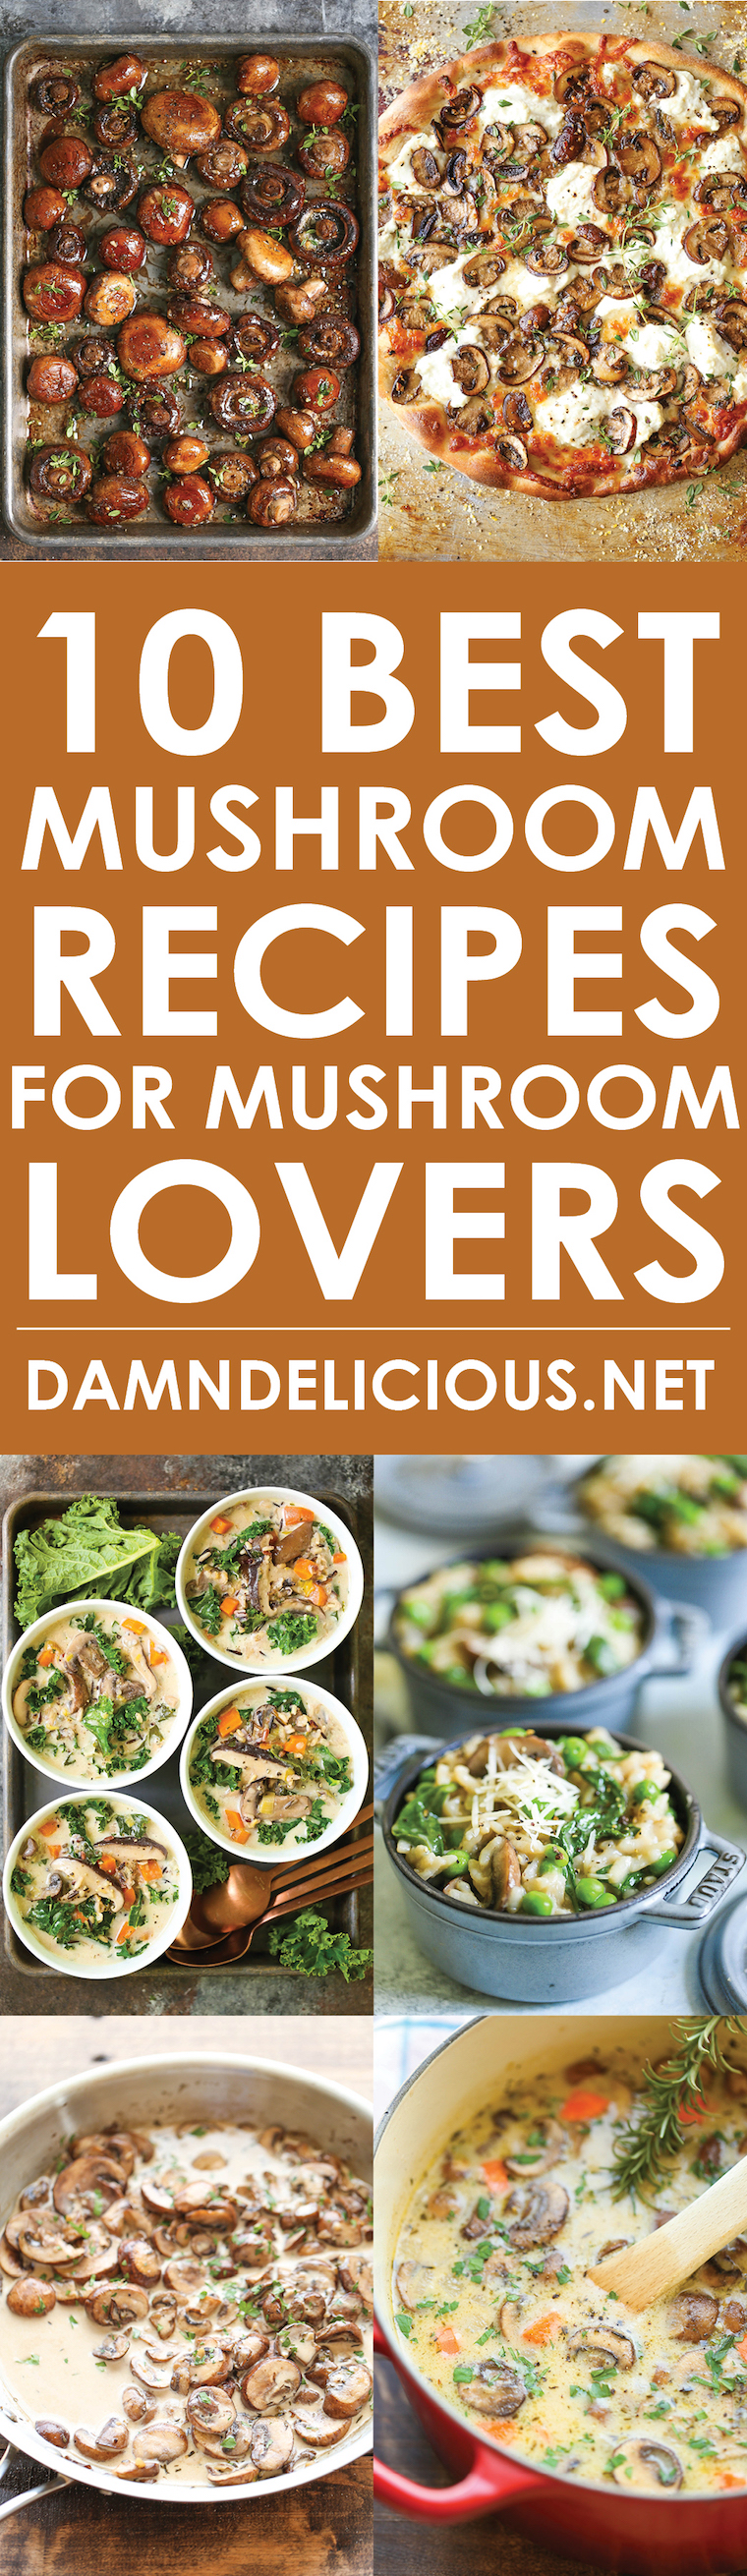 10 Best Mushroom Recipes for Mushroom Lovers - From the most amazing white mushroom pizza to the creamiest IP mushroom risotto, these recipes are THE BEST!!